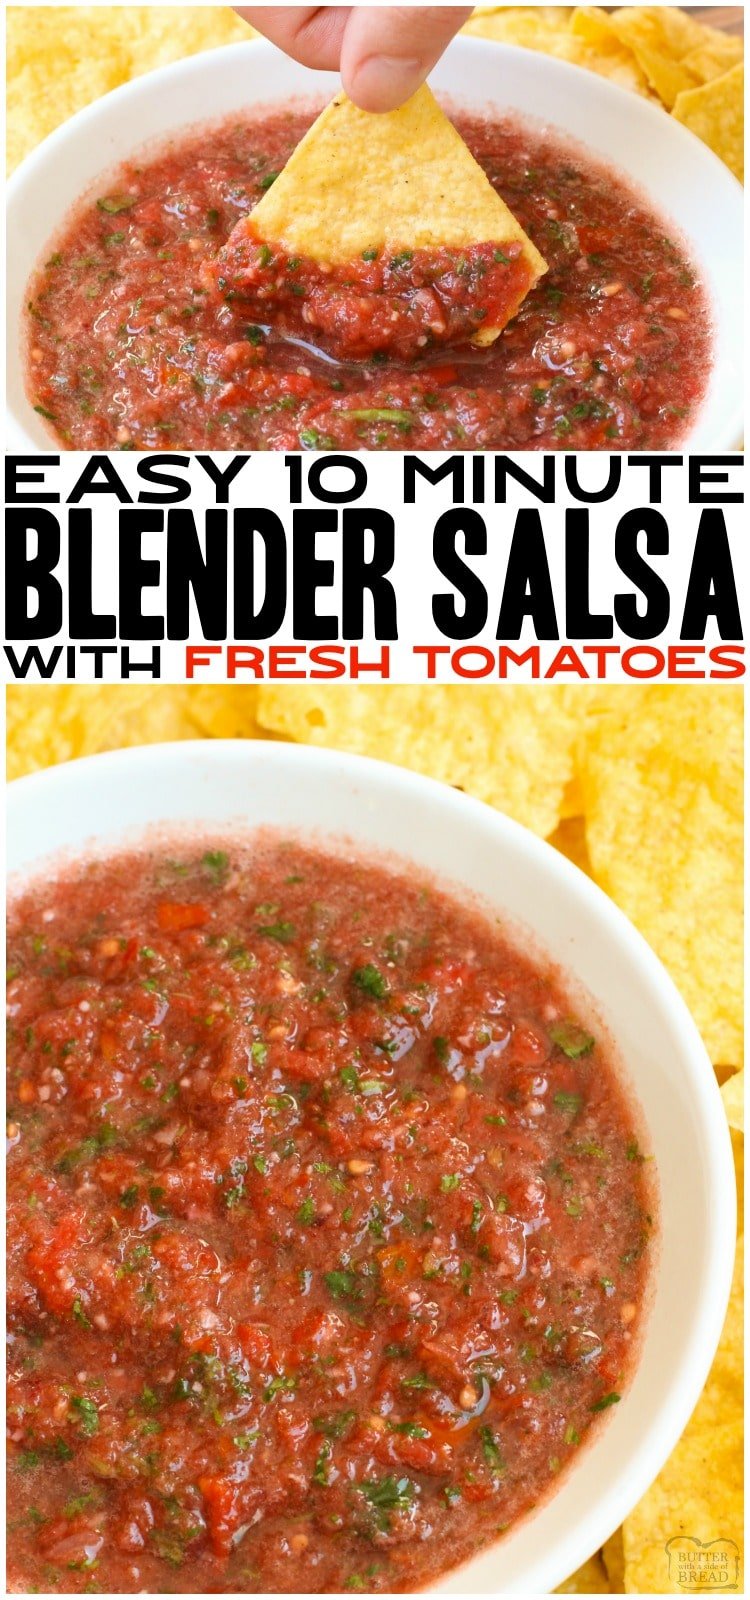 Fresh Blender Salsa made with tomatoes, cilantro, onion and lime juice made super fast in a blender! Better than restaurant homemade salsa recipe with amazing fresh flavor everyone loves. #blendersalsa #homemadesalsa #salsa #howtomakesalsa #recipefrom Butter With a Side of Bread